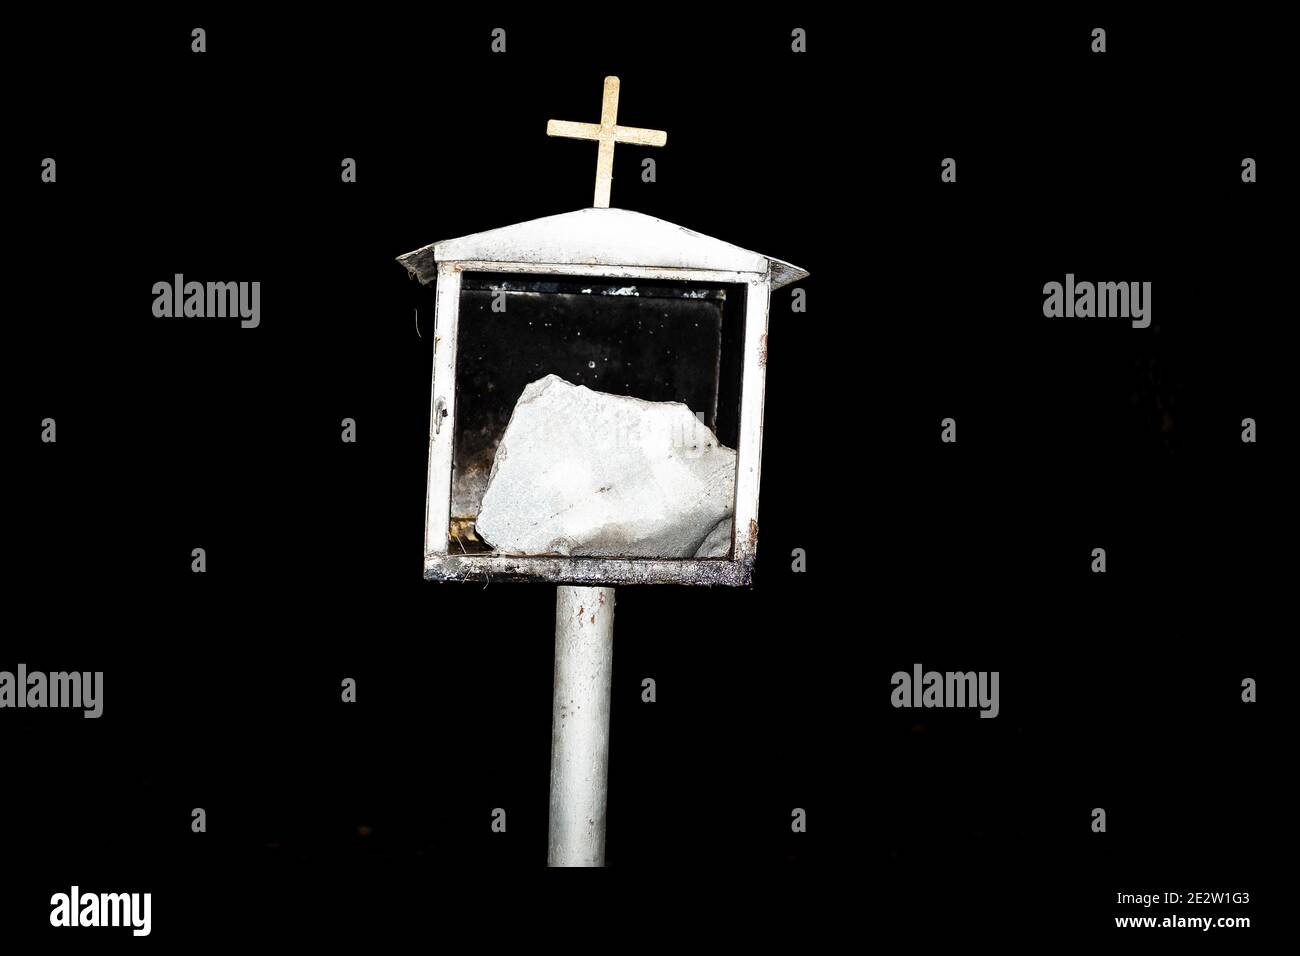 Athens, Greece - December 29, 2019: Crosses in Lycabettus Hill Stock Photo